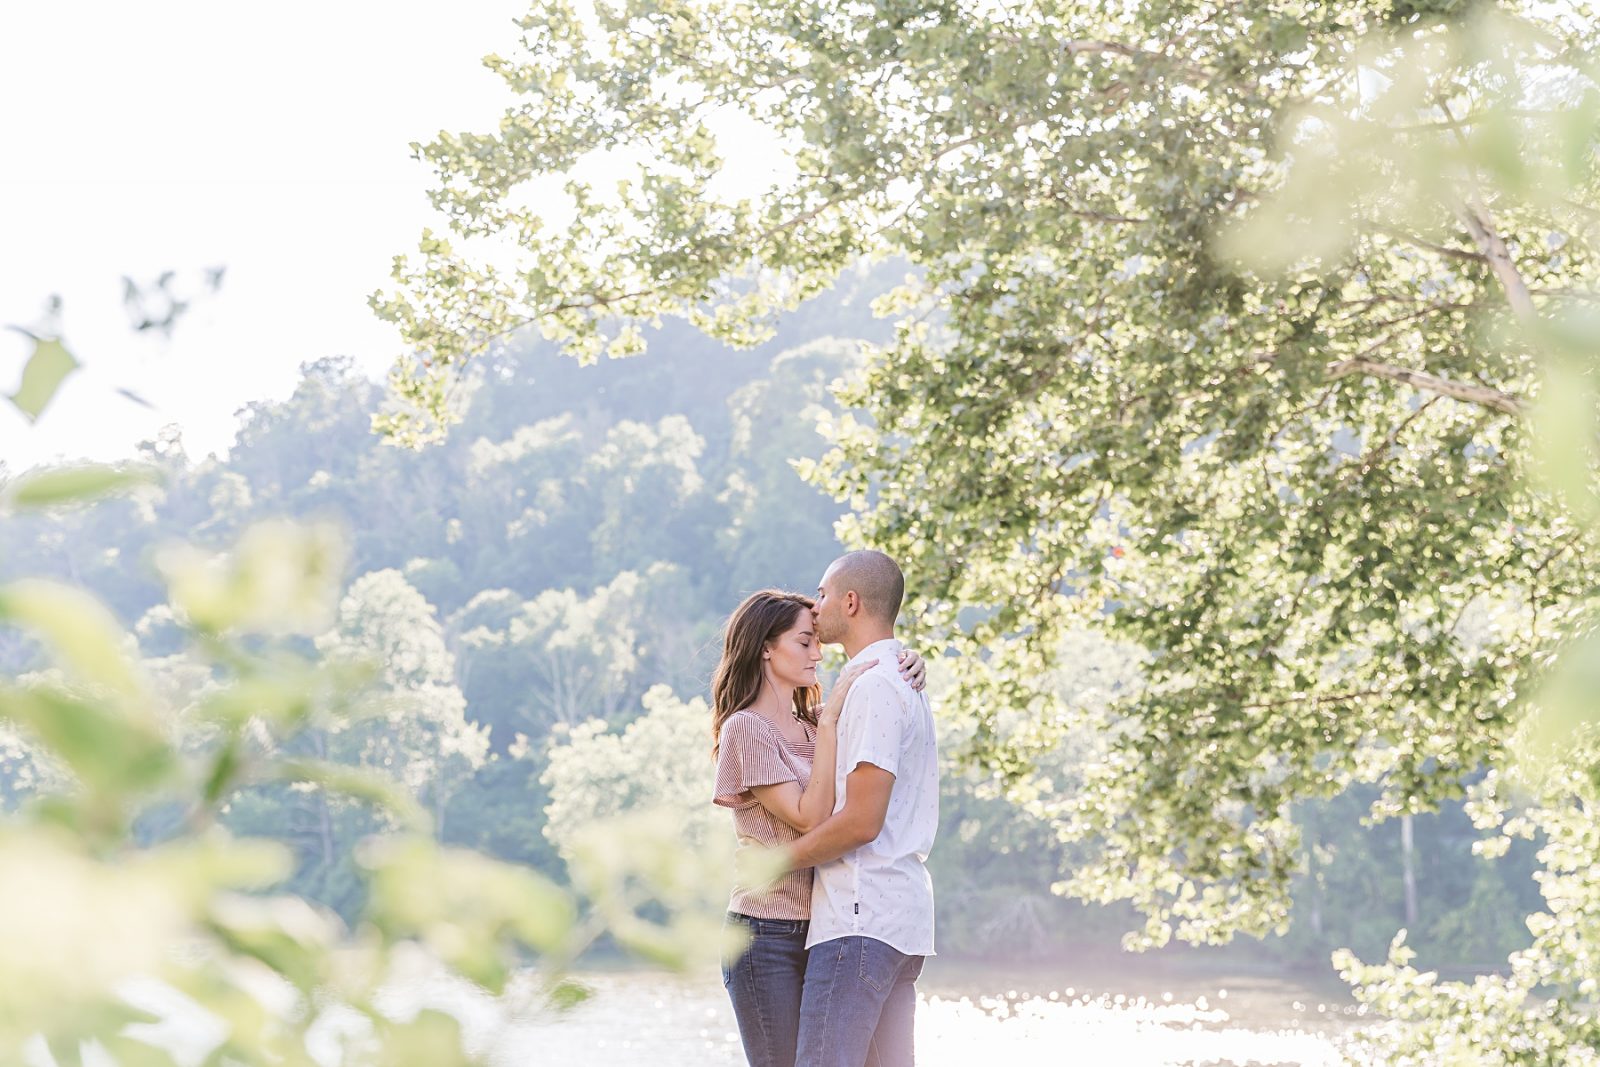 Couples engagement photos in Morgantown West Virginia by Diana Gramlich Photography